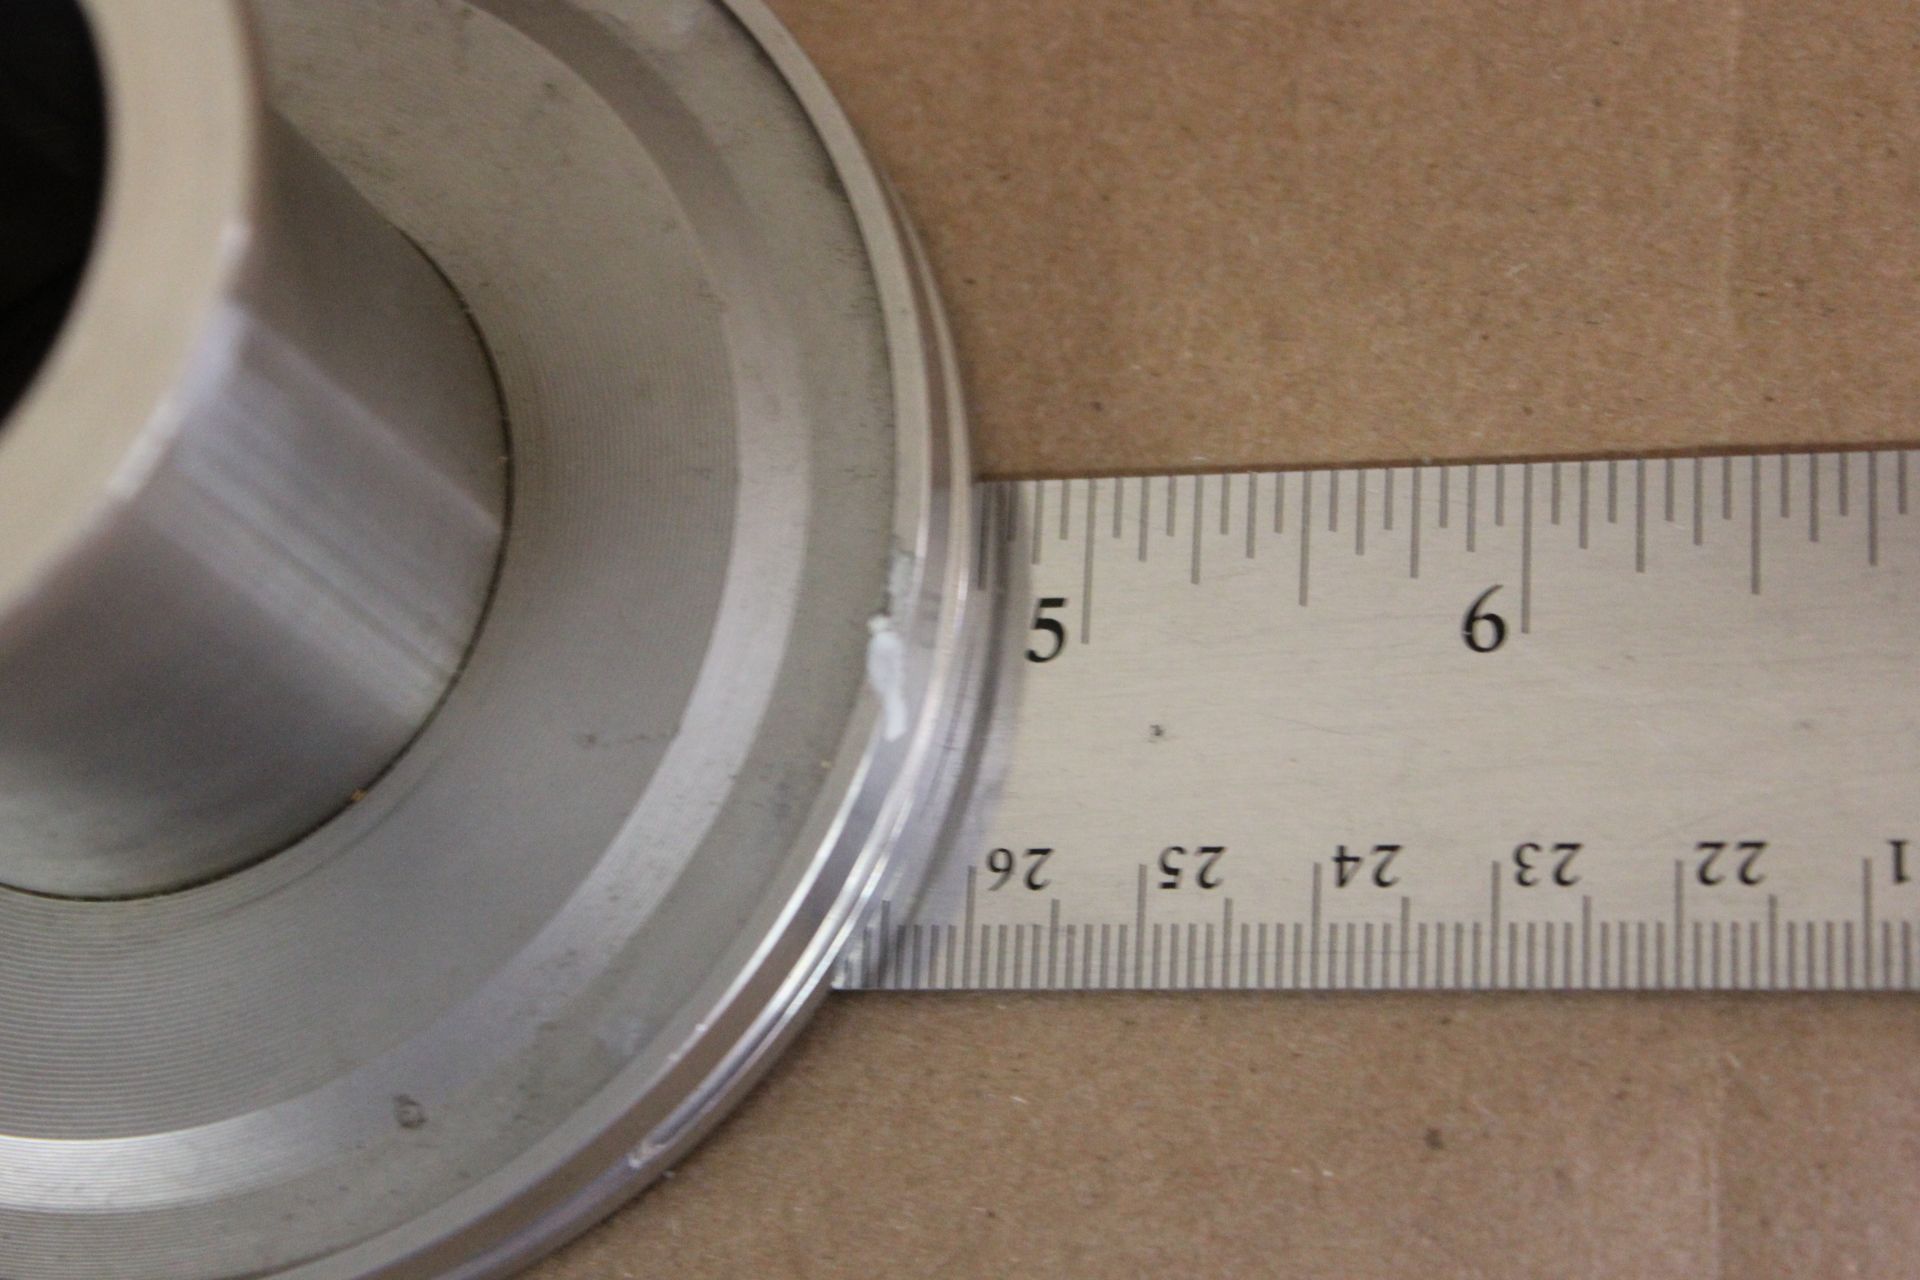 LOT OF 2 NEW HIGH VACUUM CONFLAT ADAPTER FLANGE - Image 5 of 10